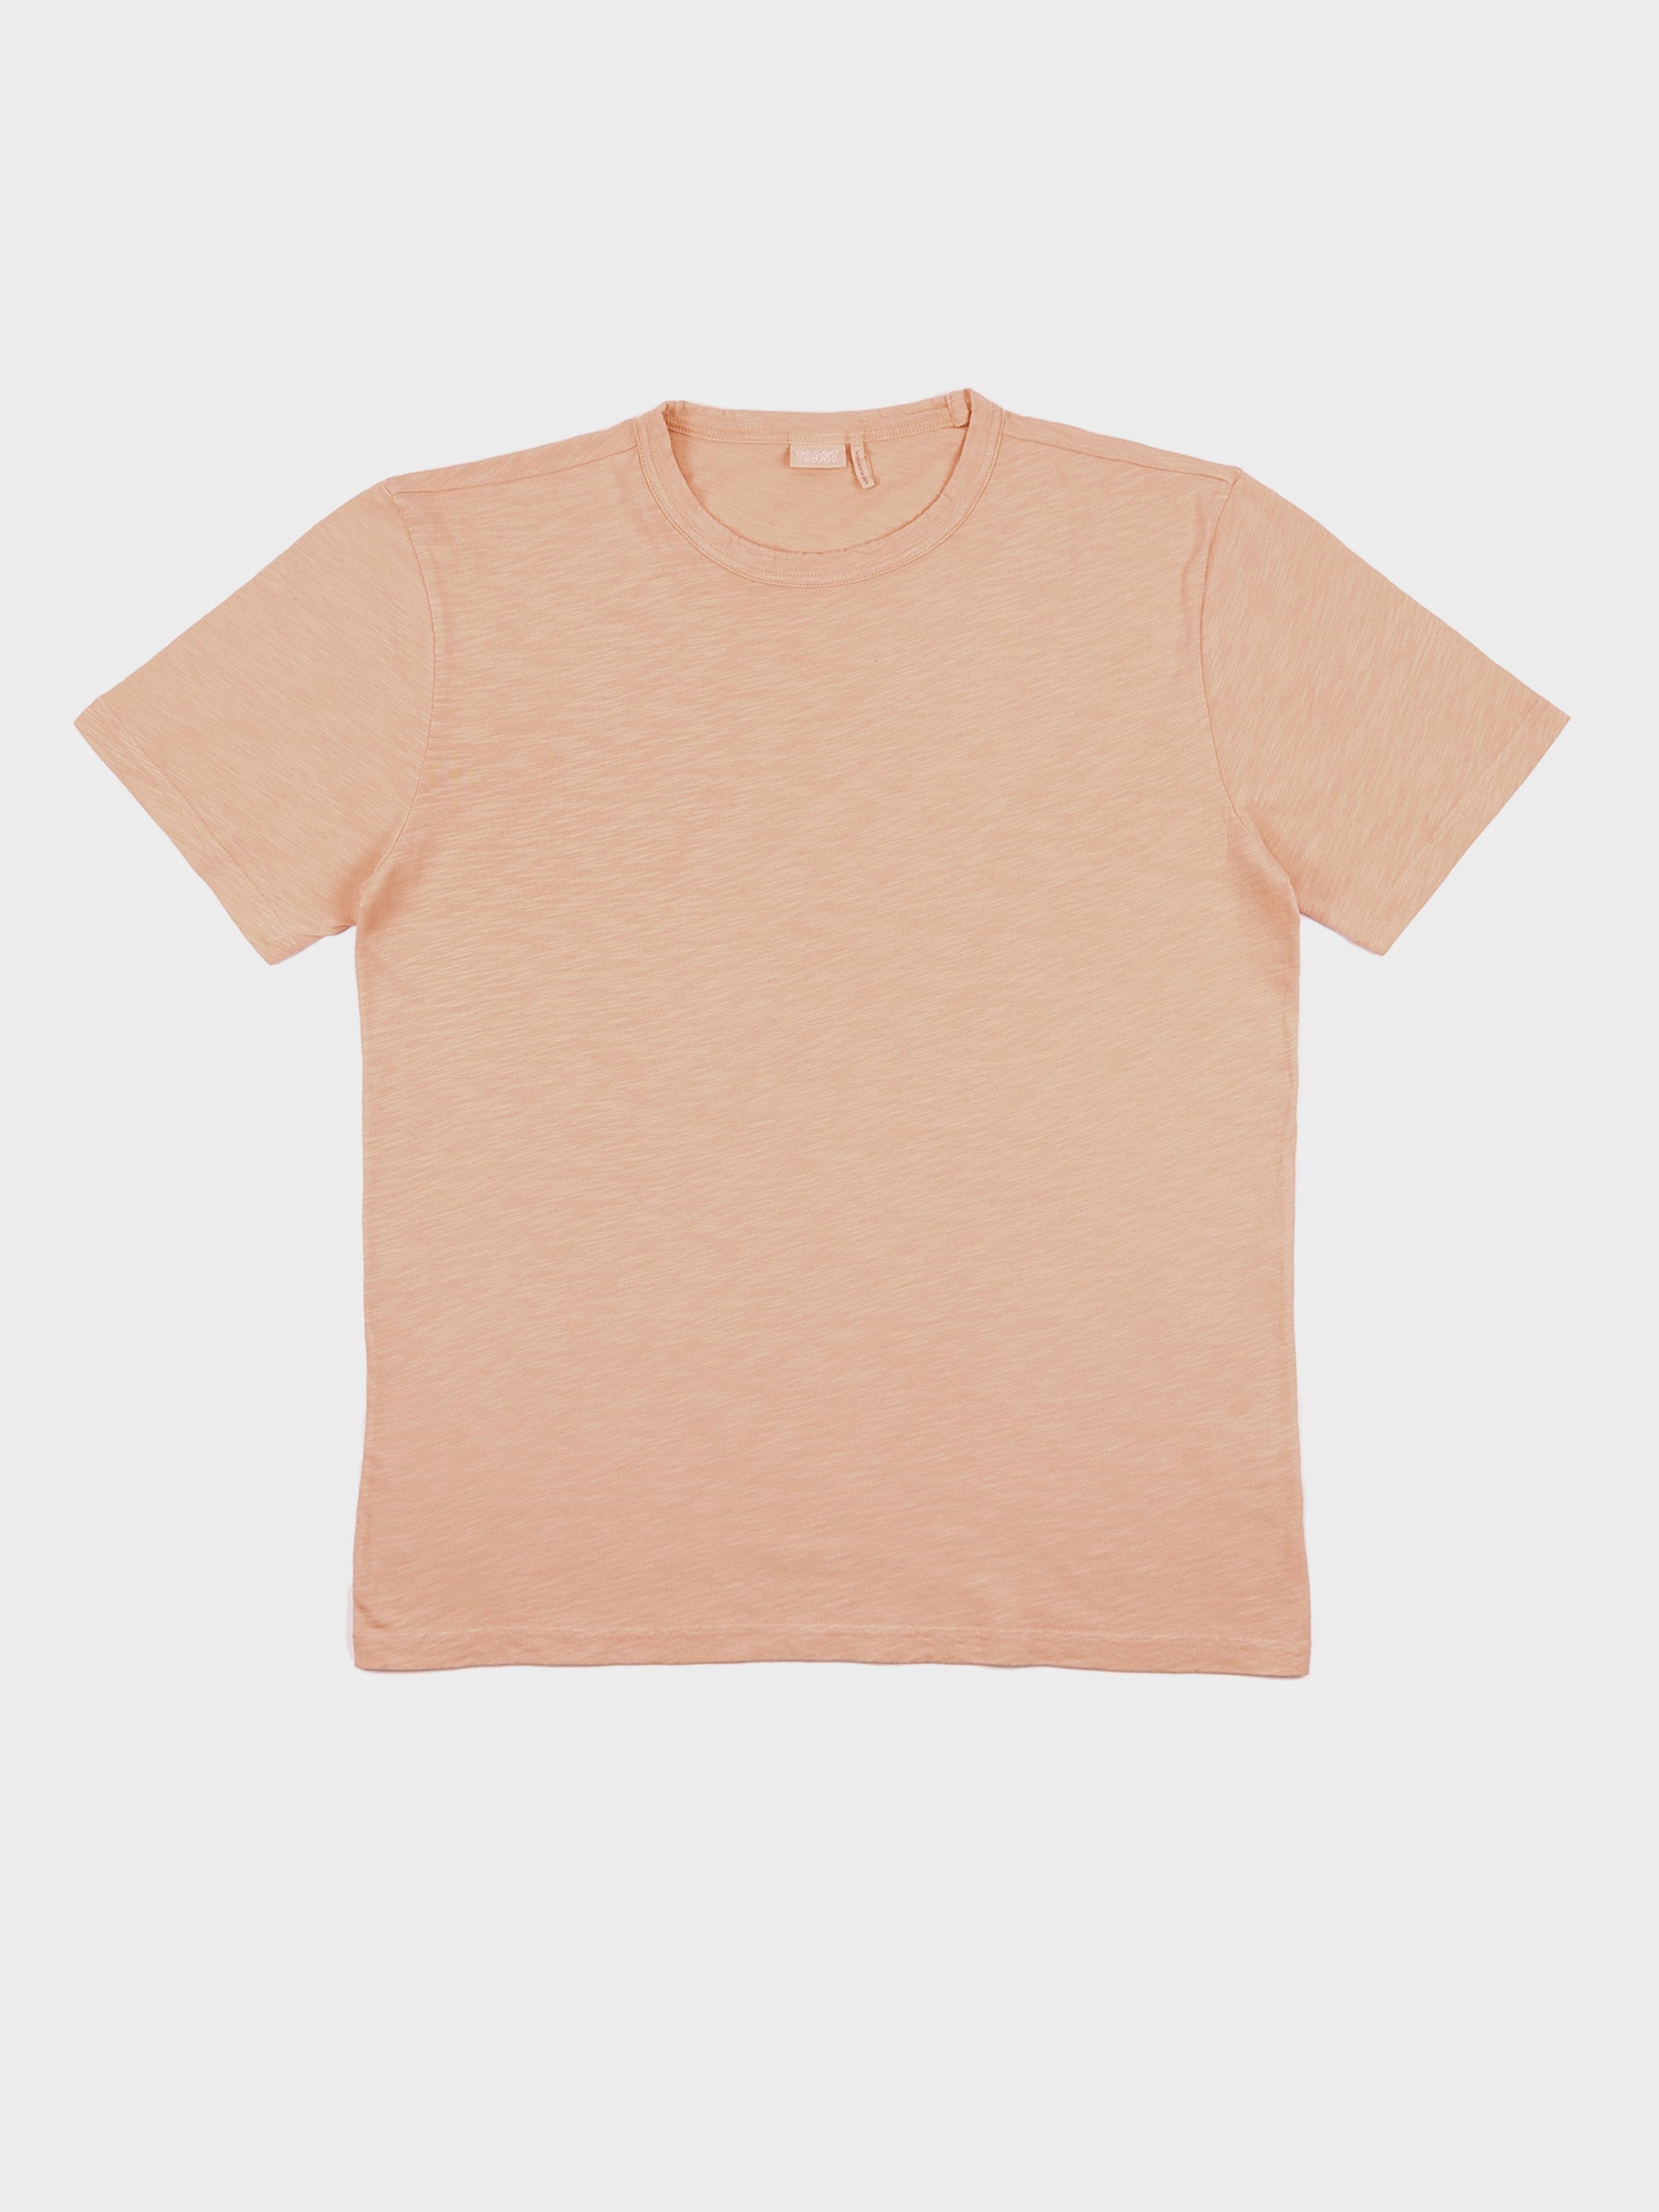 TOAST Theo S/S T-Shirt - Nectar Pink